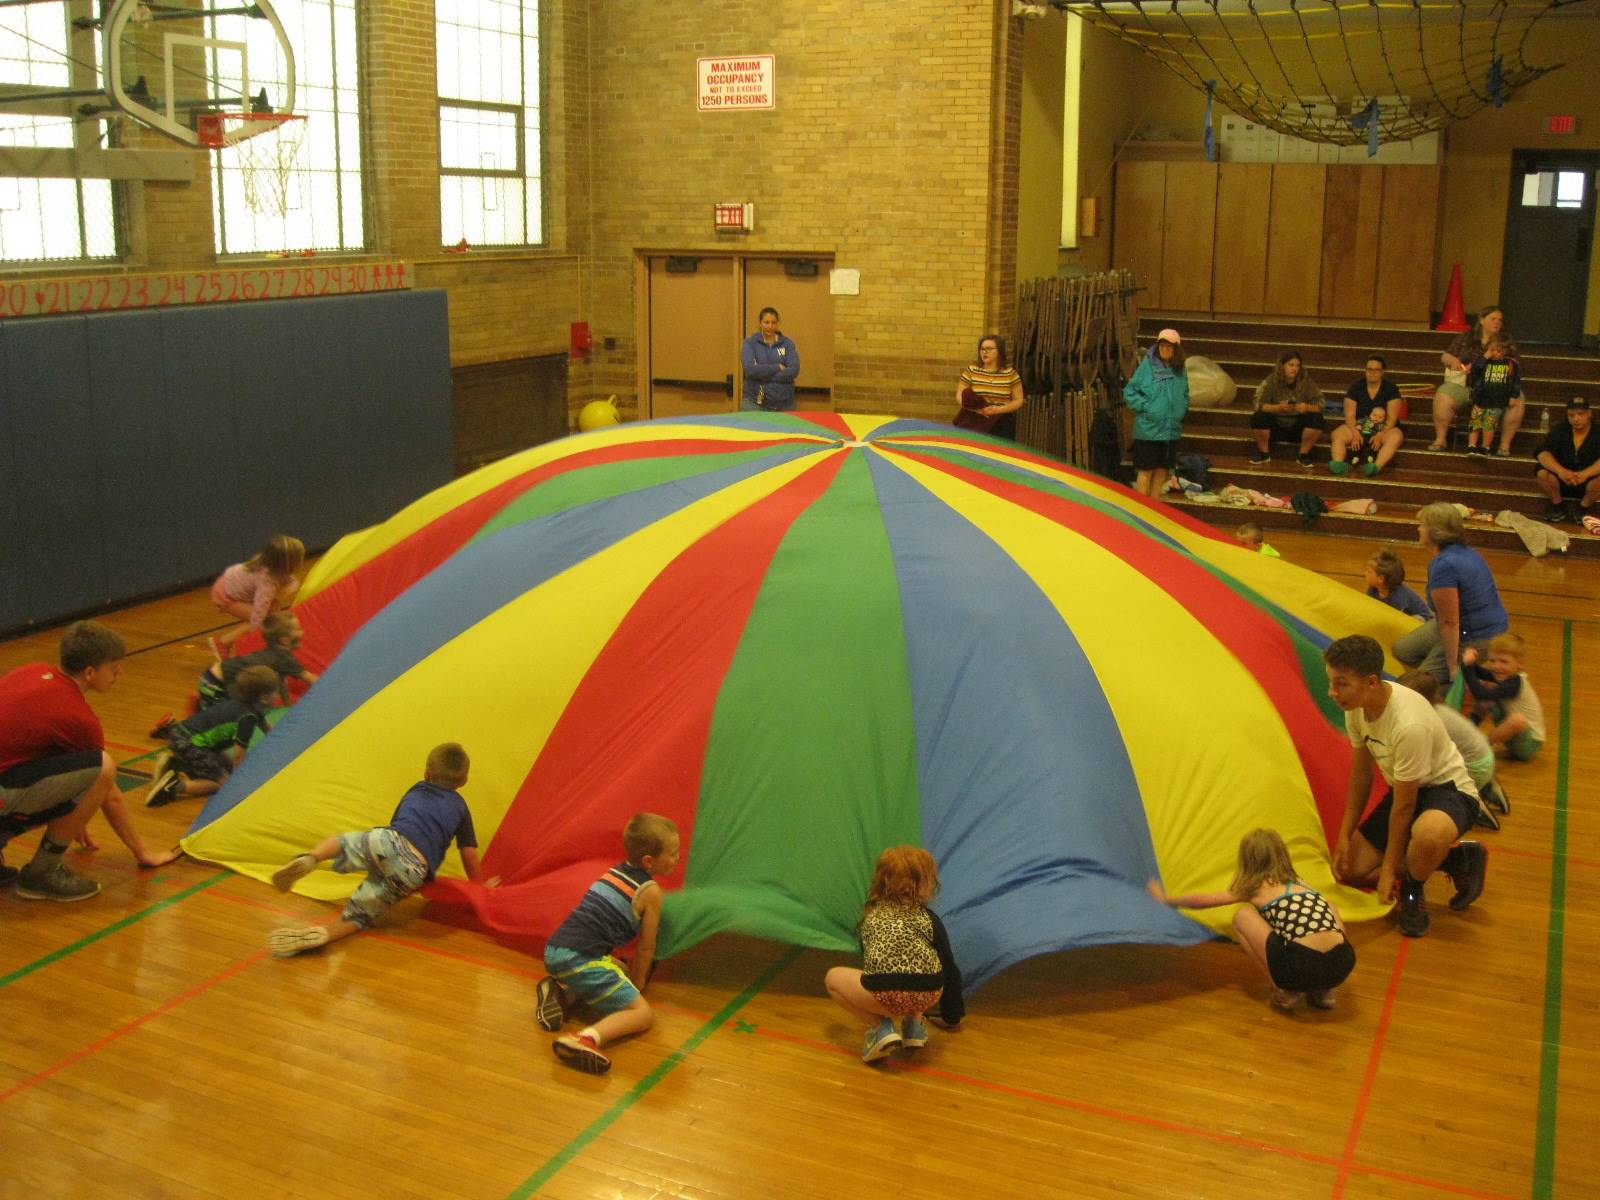 Students playing with parachute